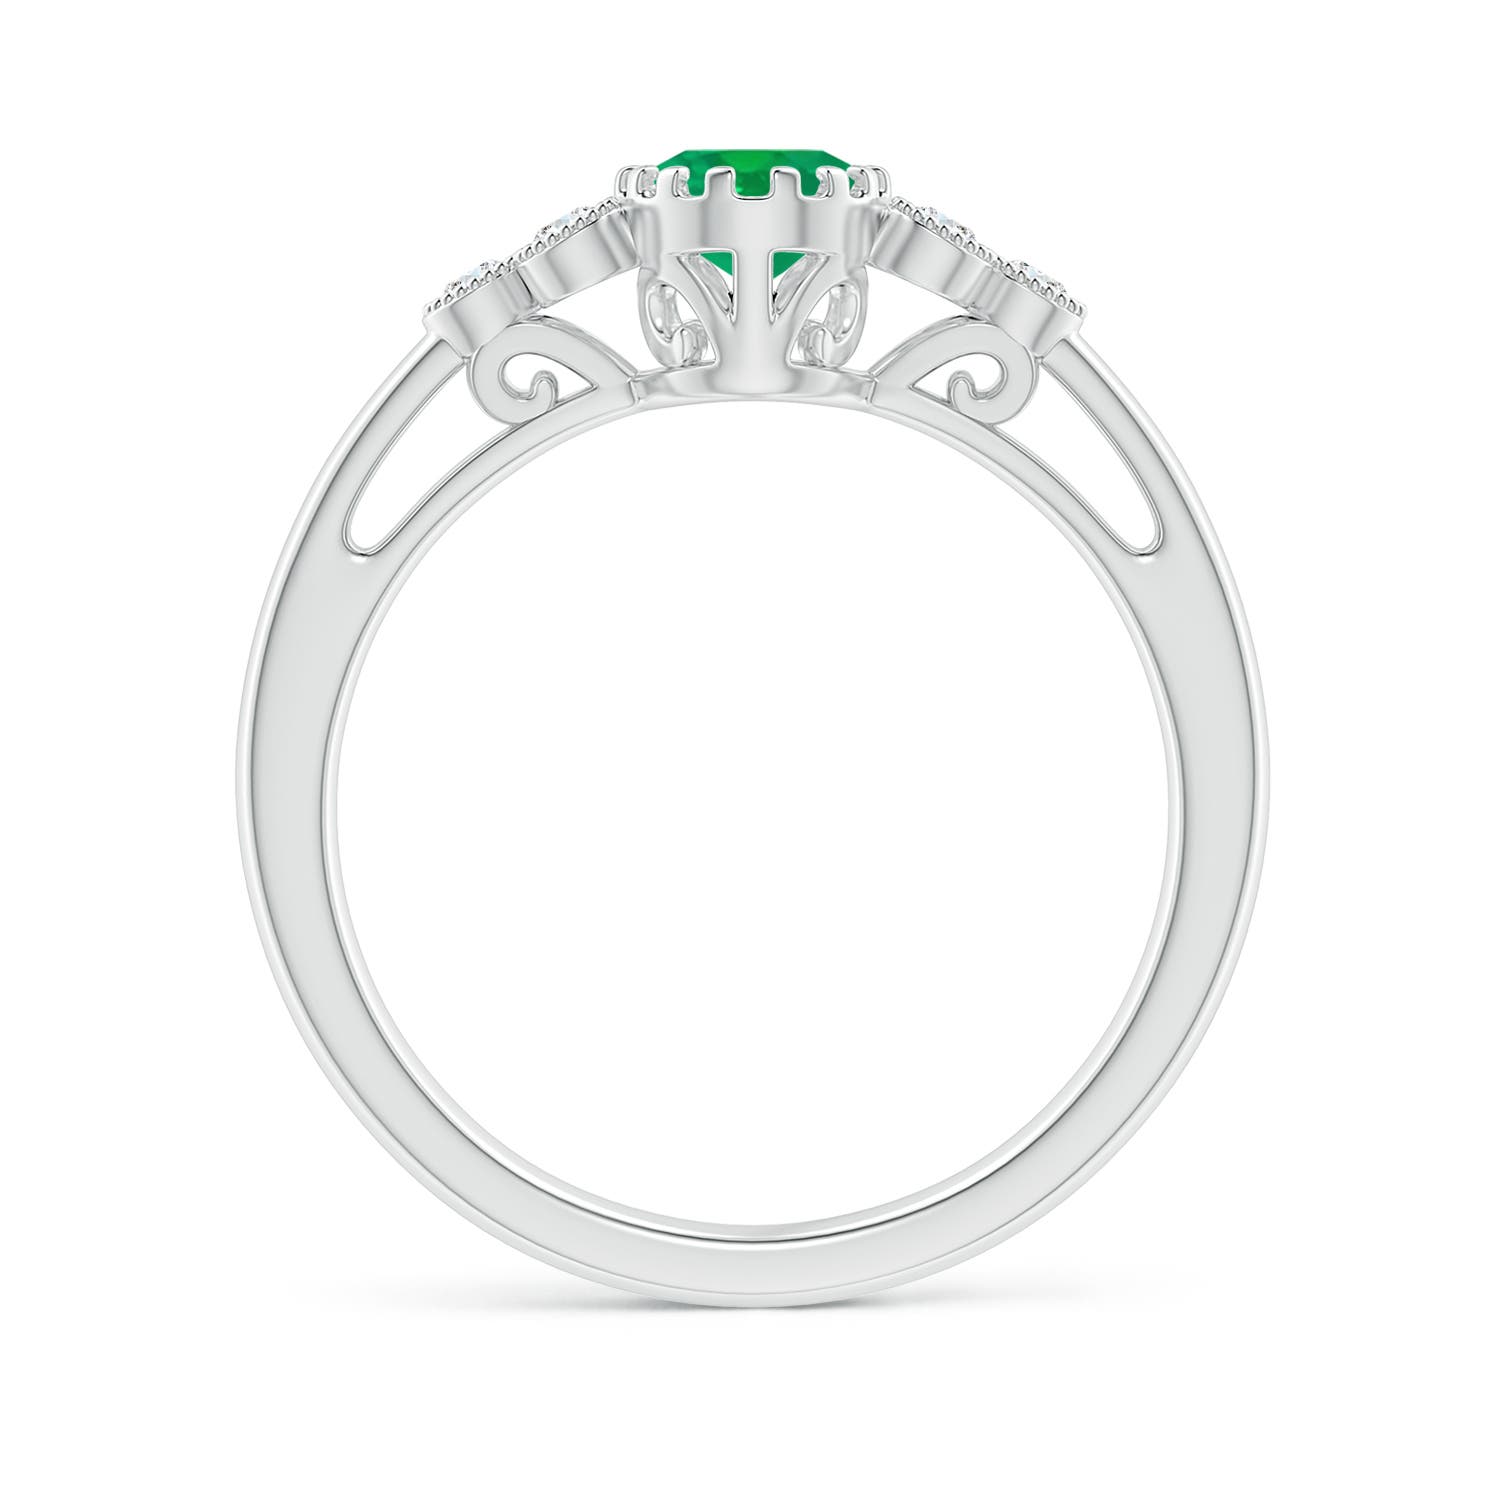 AA - Emerald / 0.8 CT / 14 KT White Gold